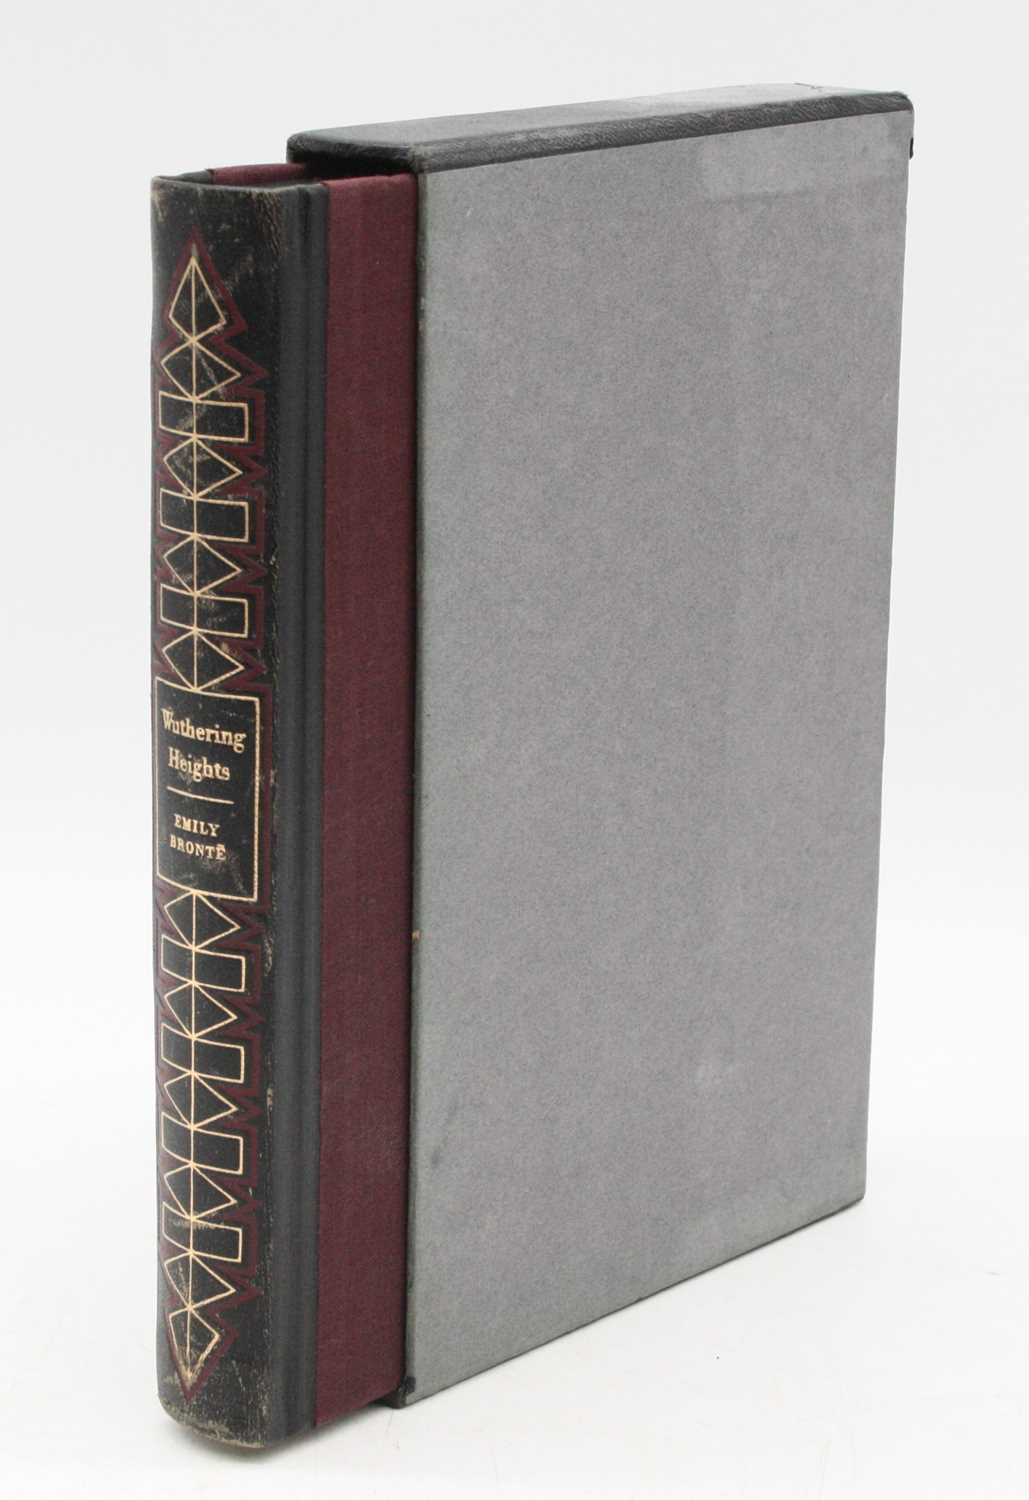 Bronte, Charlotte, Emily and Anne: The Complete Novels, London Folio Society, 1991, in slip-case, - Image 2 of 2